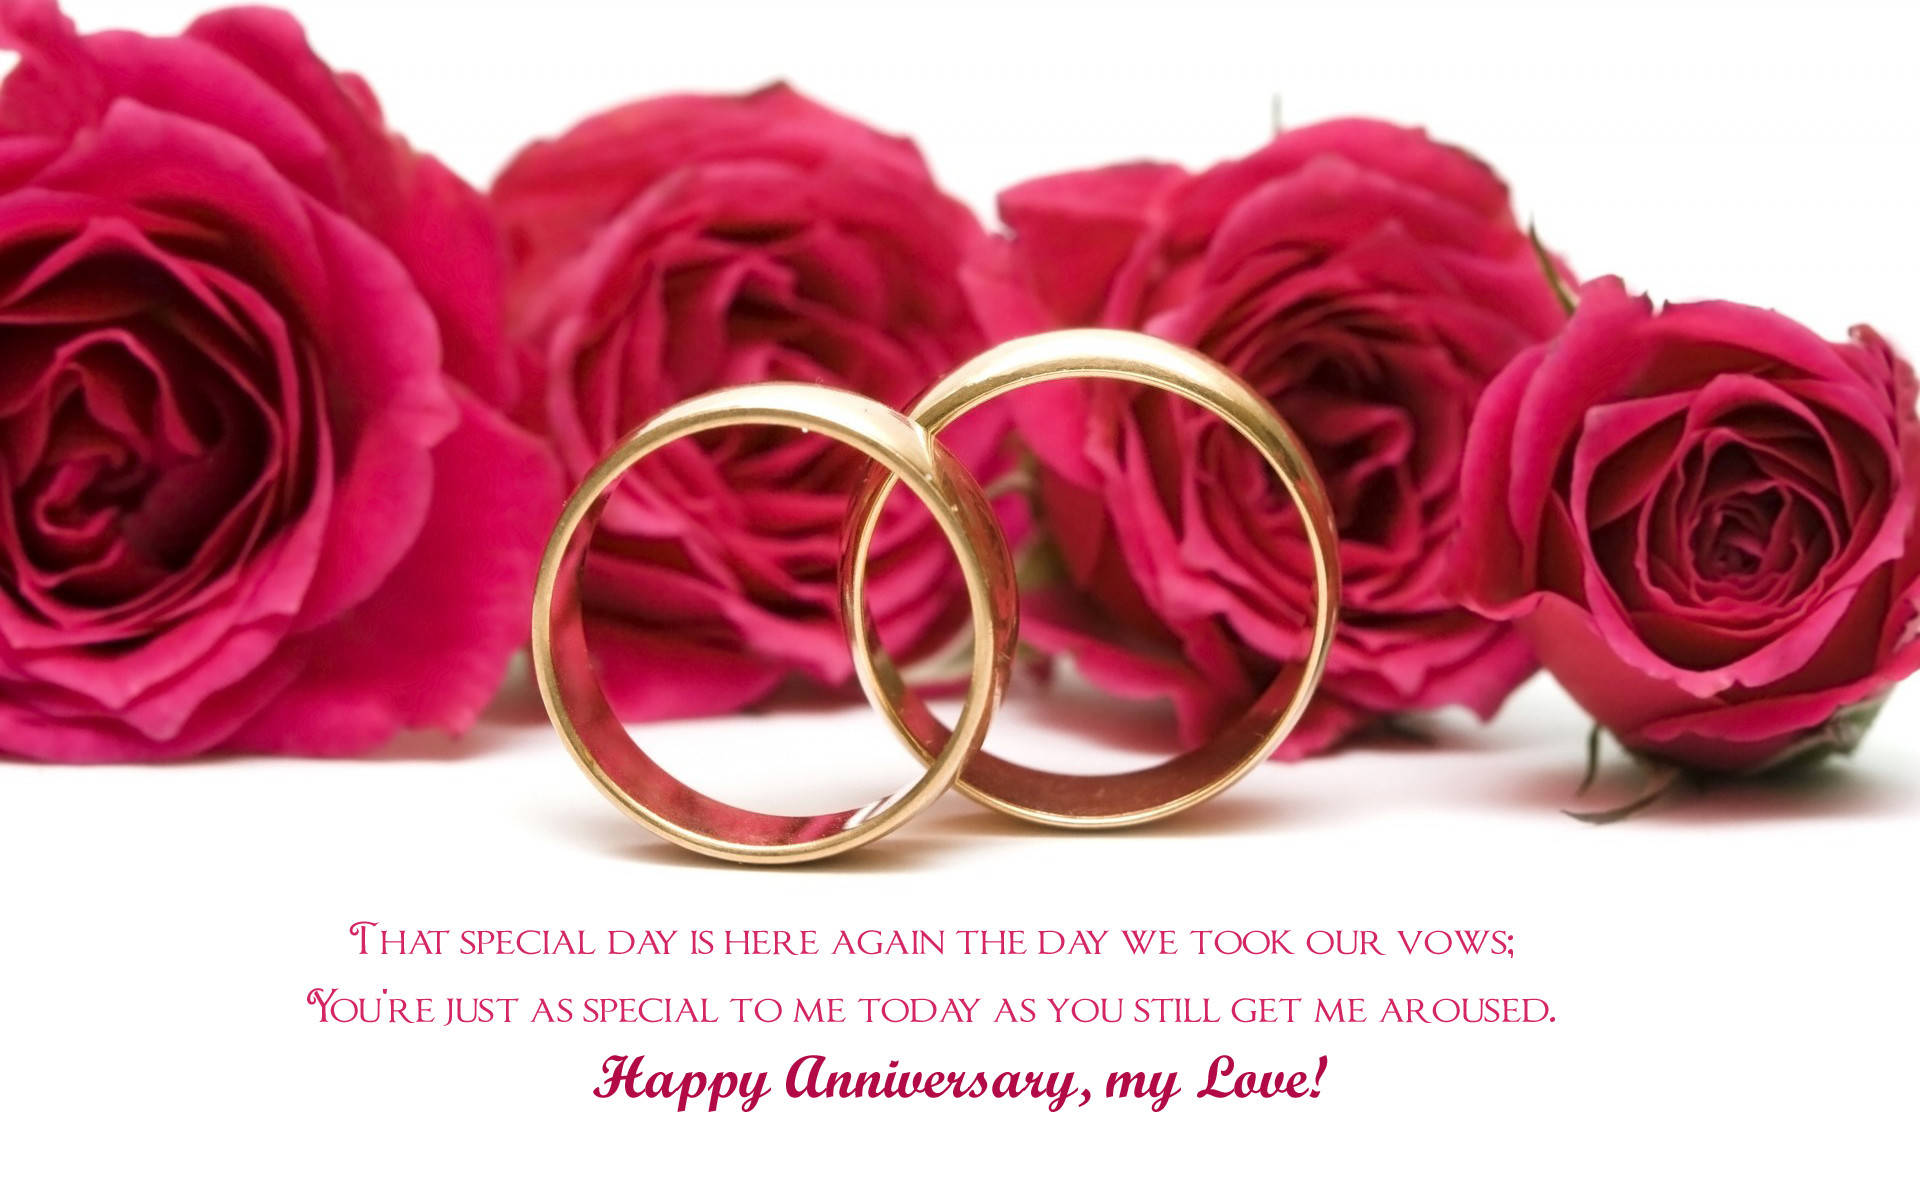 Happy Anniversary Gold Rings And Roses Wallpaper